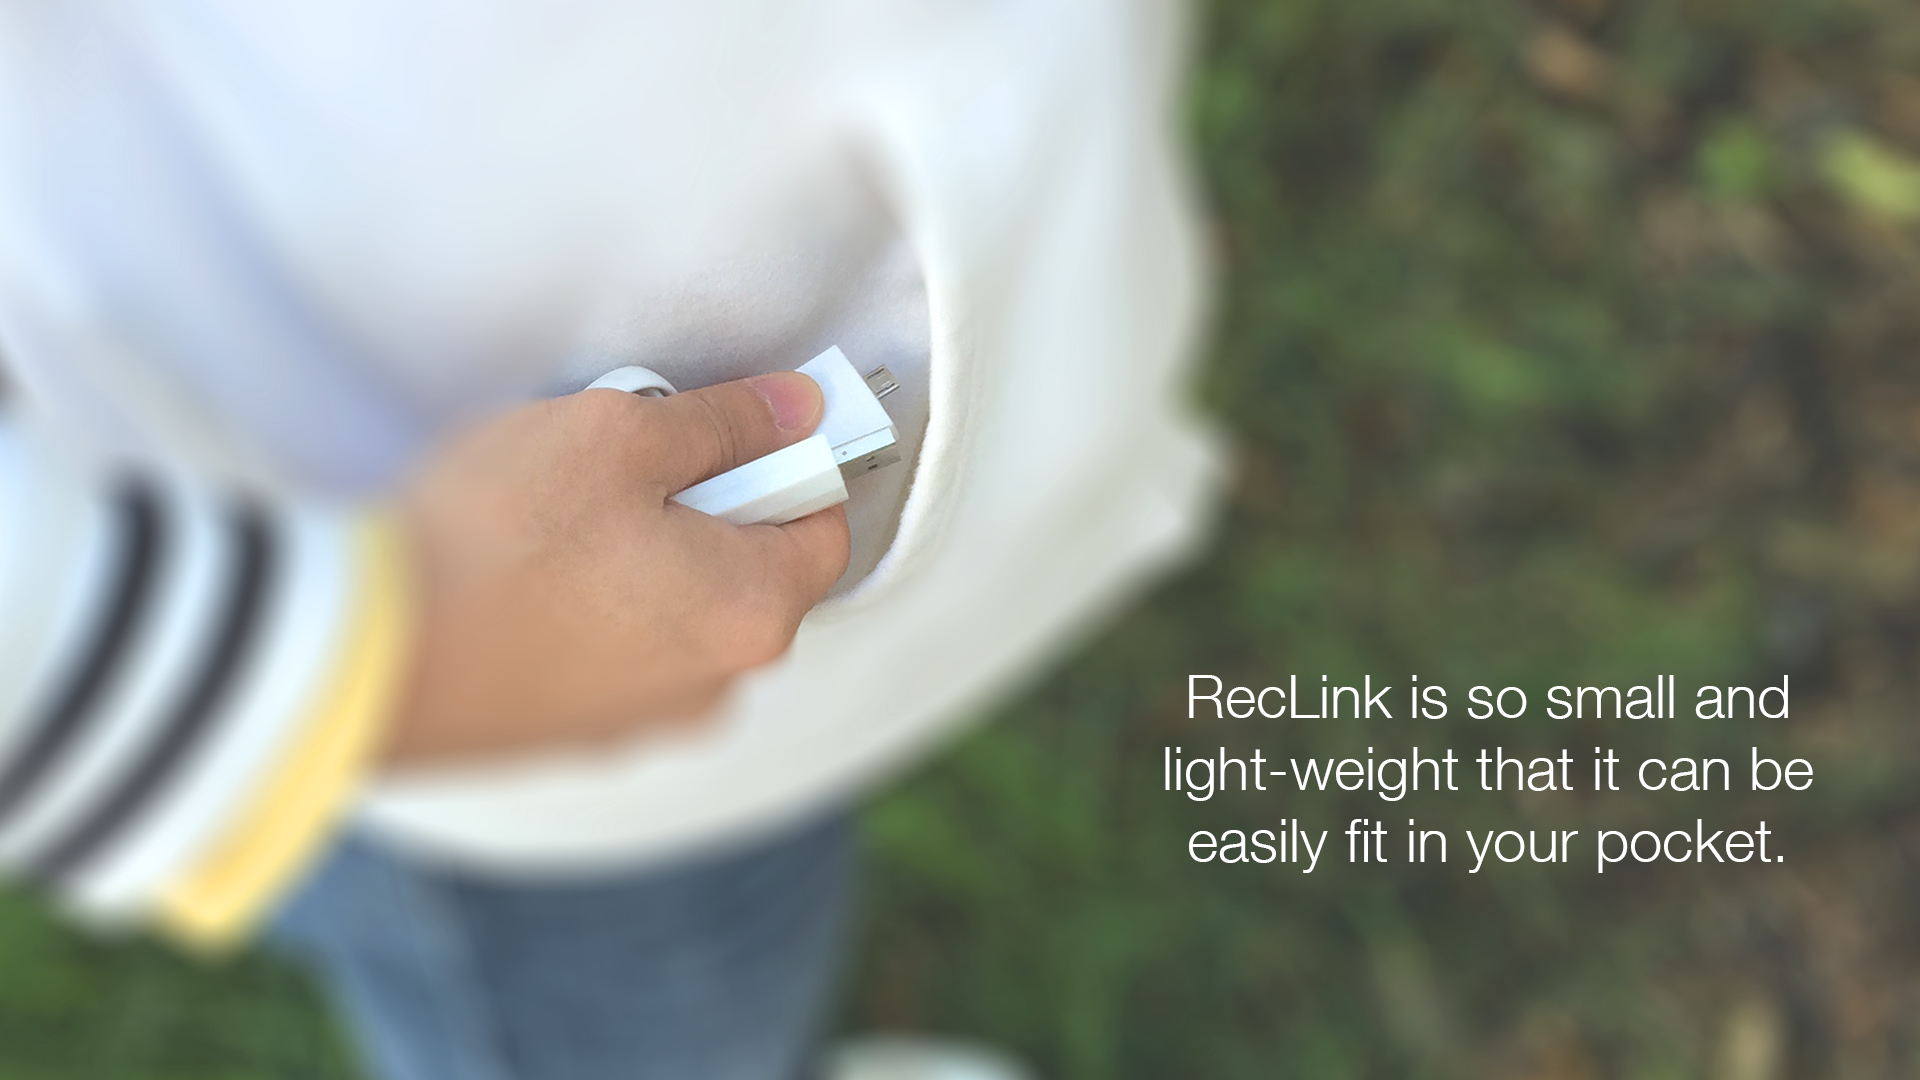 RecLink is so small and light-weight that it can be easily fit in your pocket.